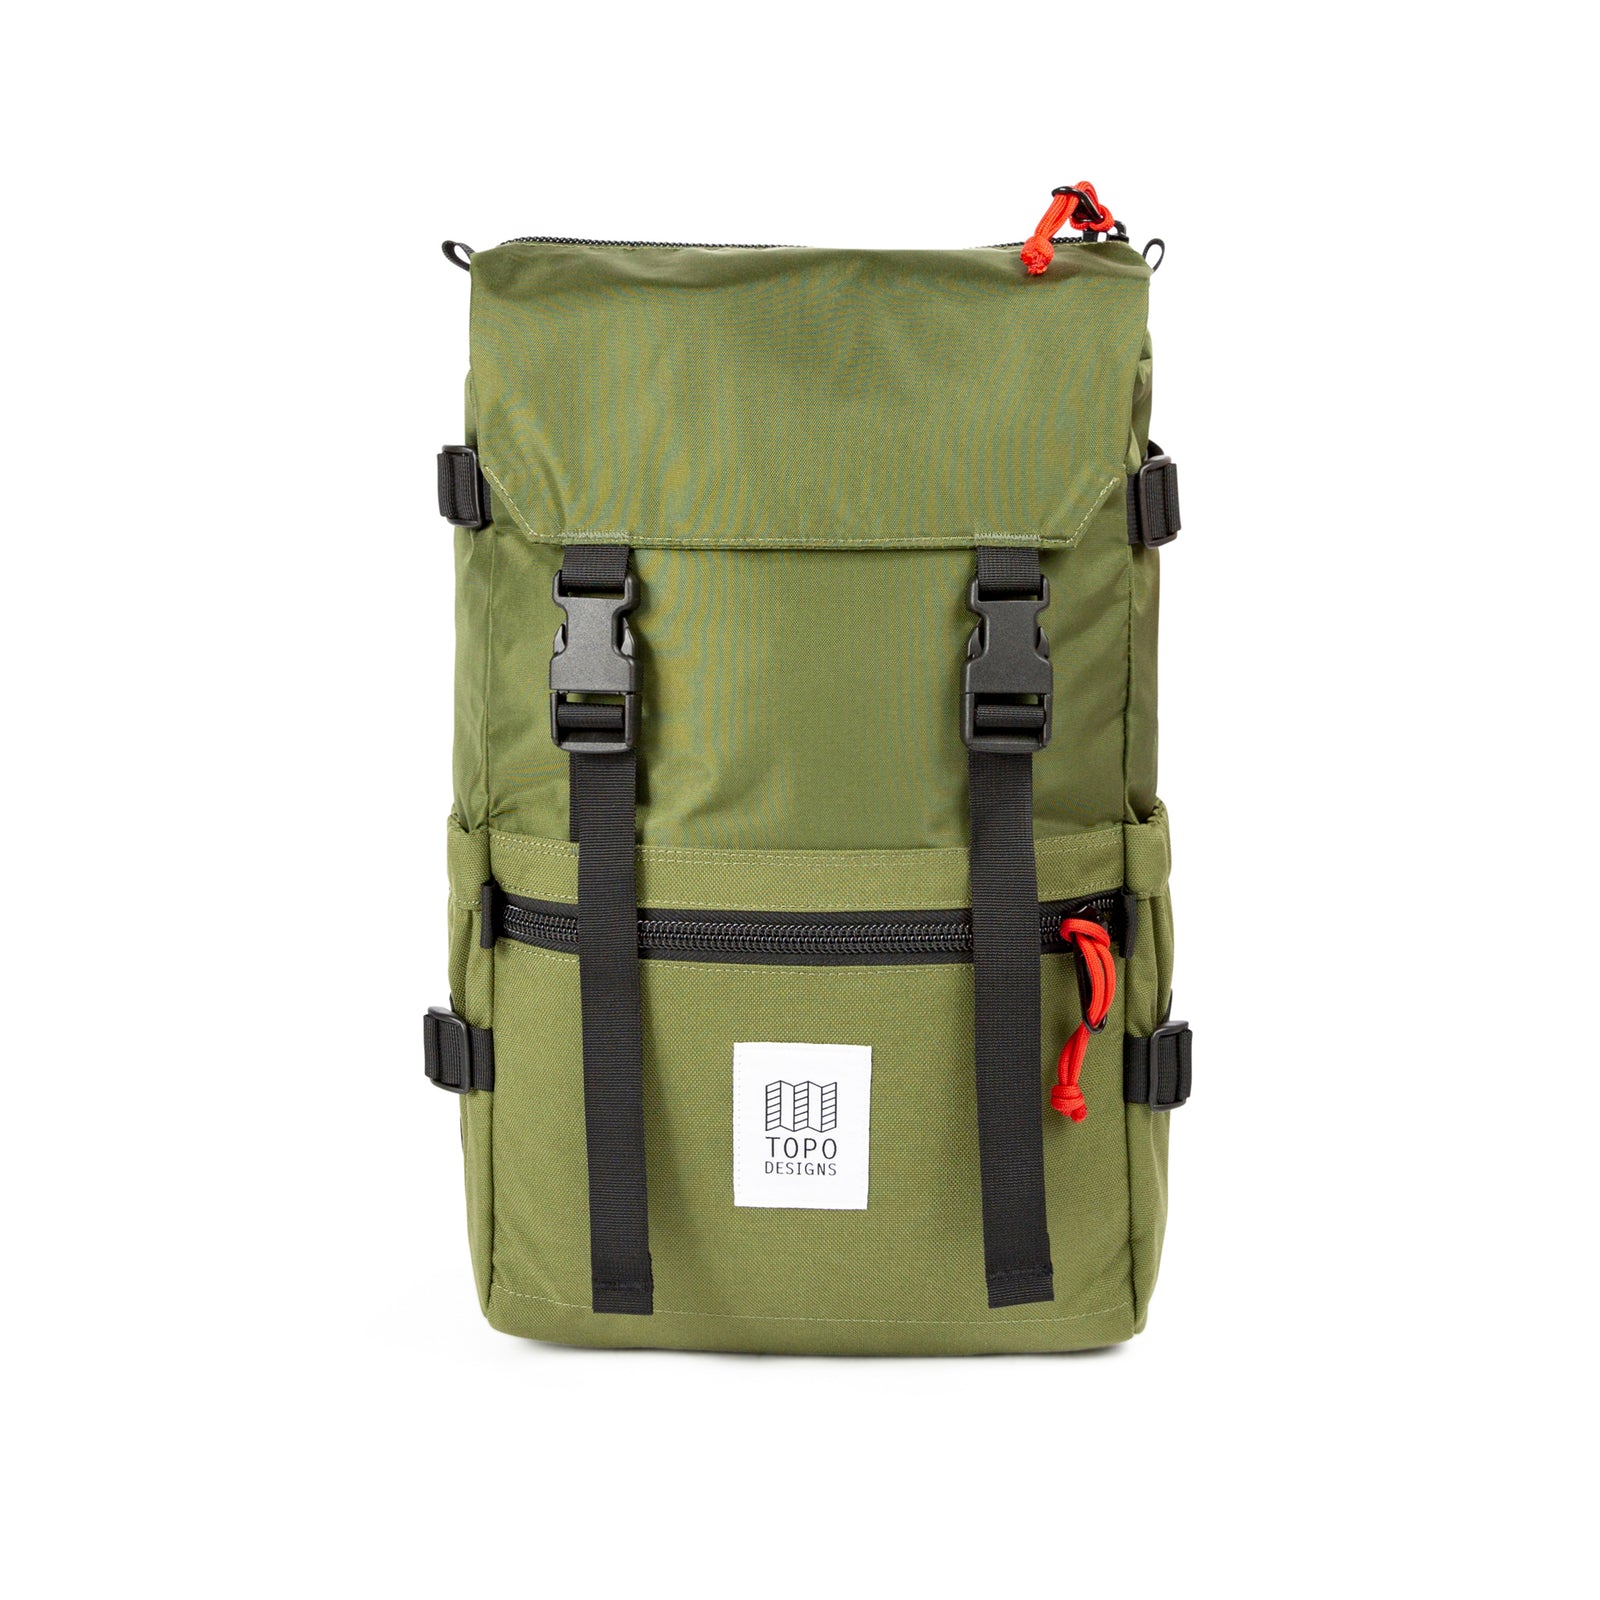 Front Product Shot of the Topo Designs Rover Pack Classic in "Olive" green.